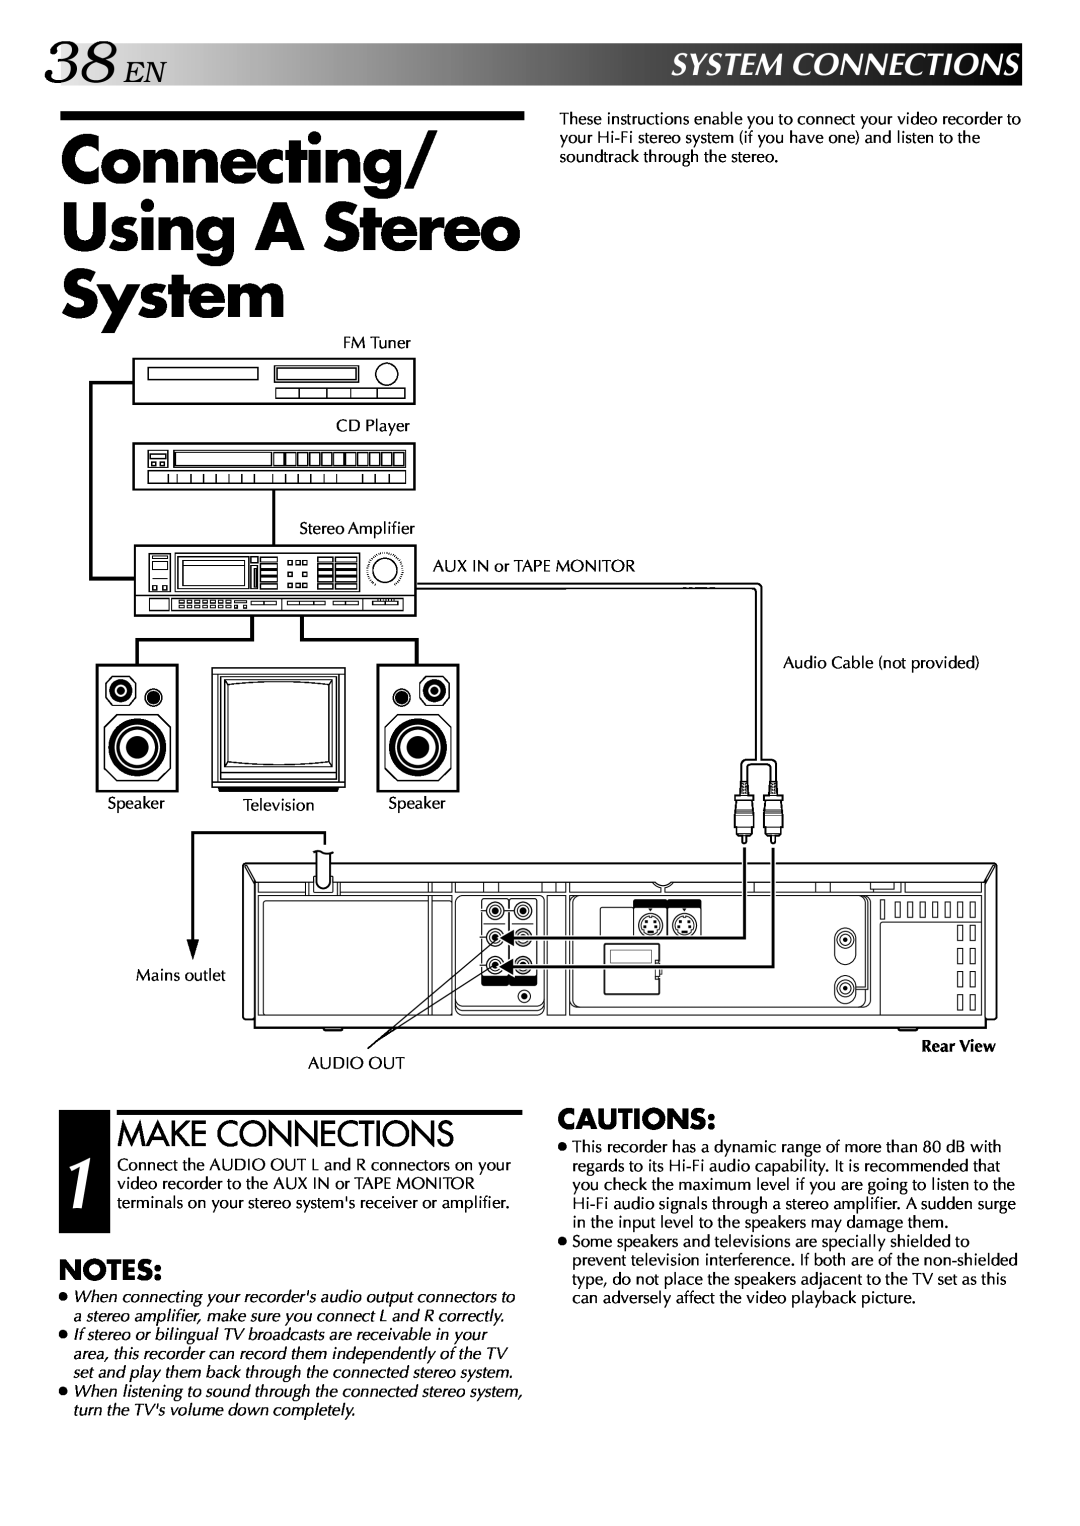 JVC HR-S5700AM, LPT0428-001A Connecting Using A Stereo System, 38EN, Make Connections, Systemconnections, Cautions 